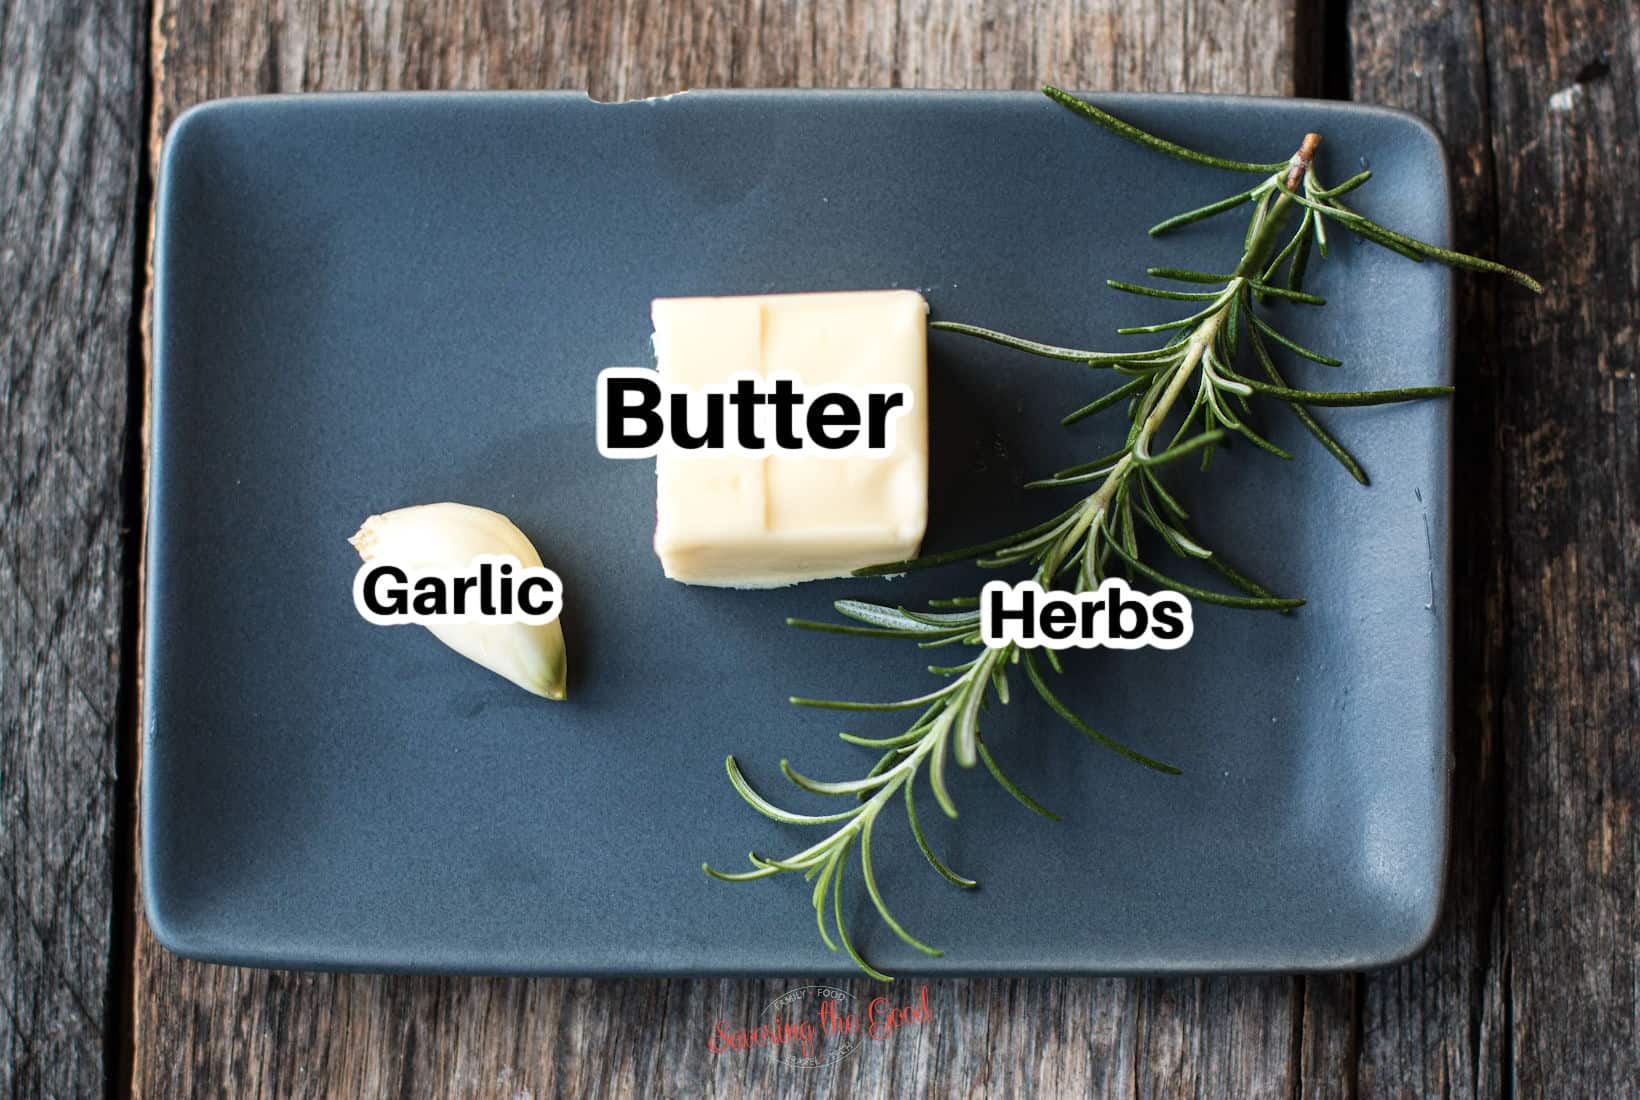 sauce ingredients with text overlay, garlic clove, butter, herbs.